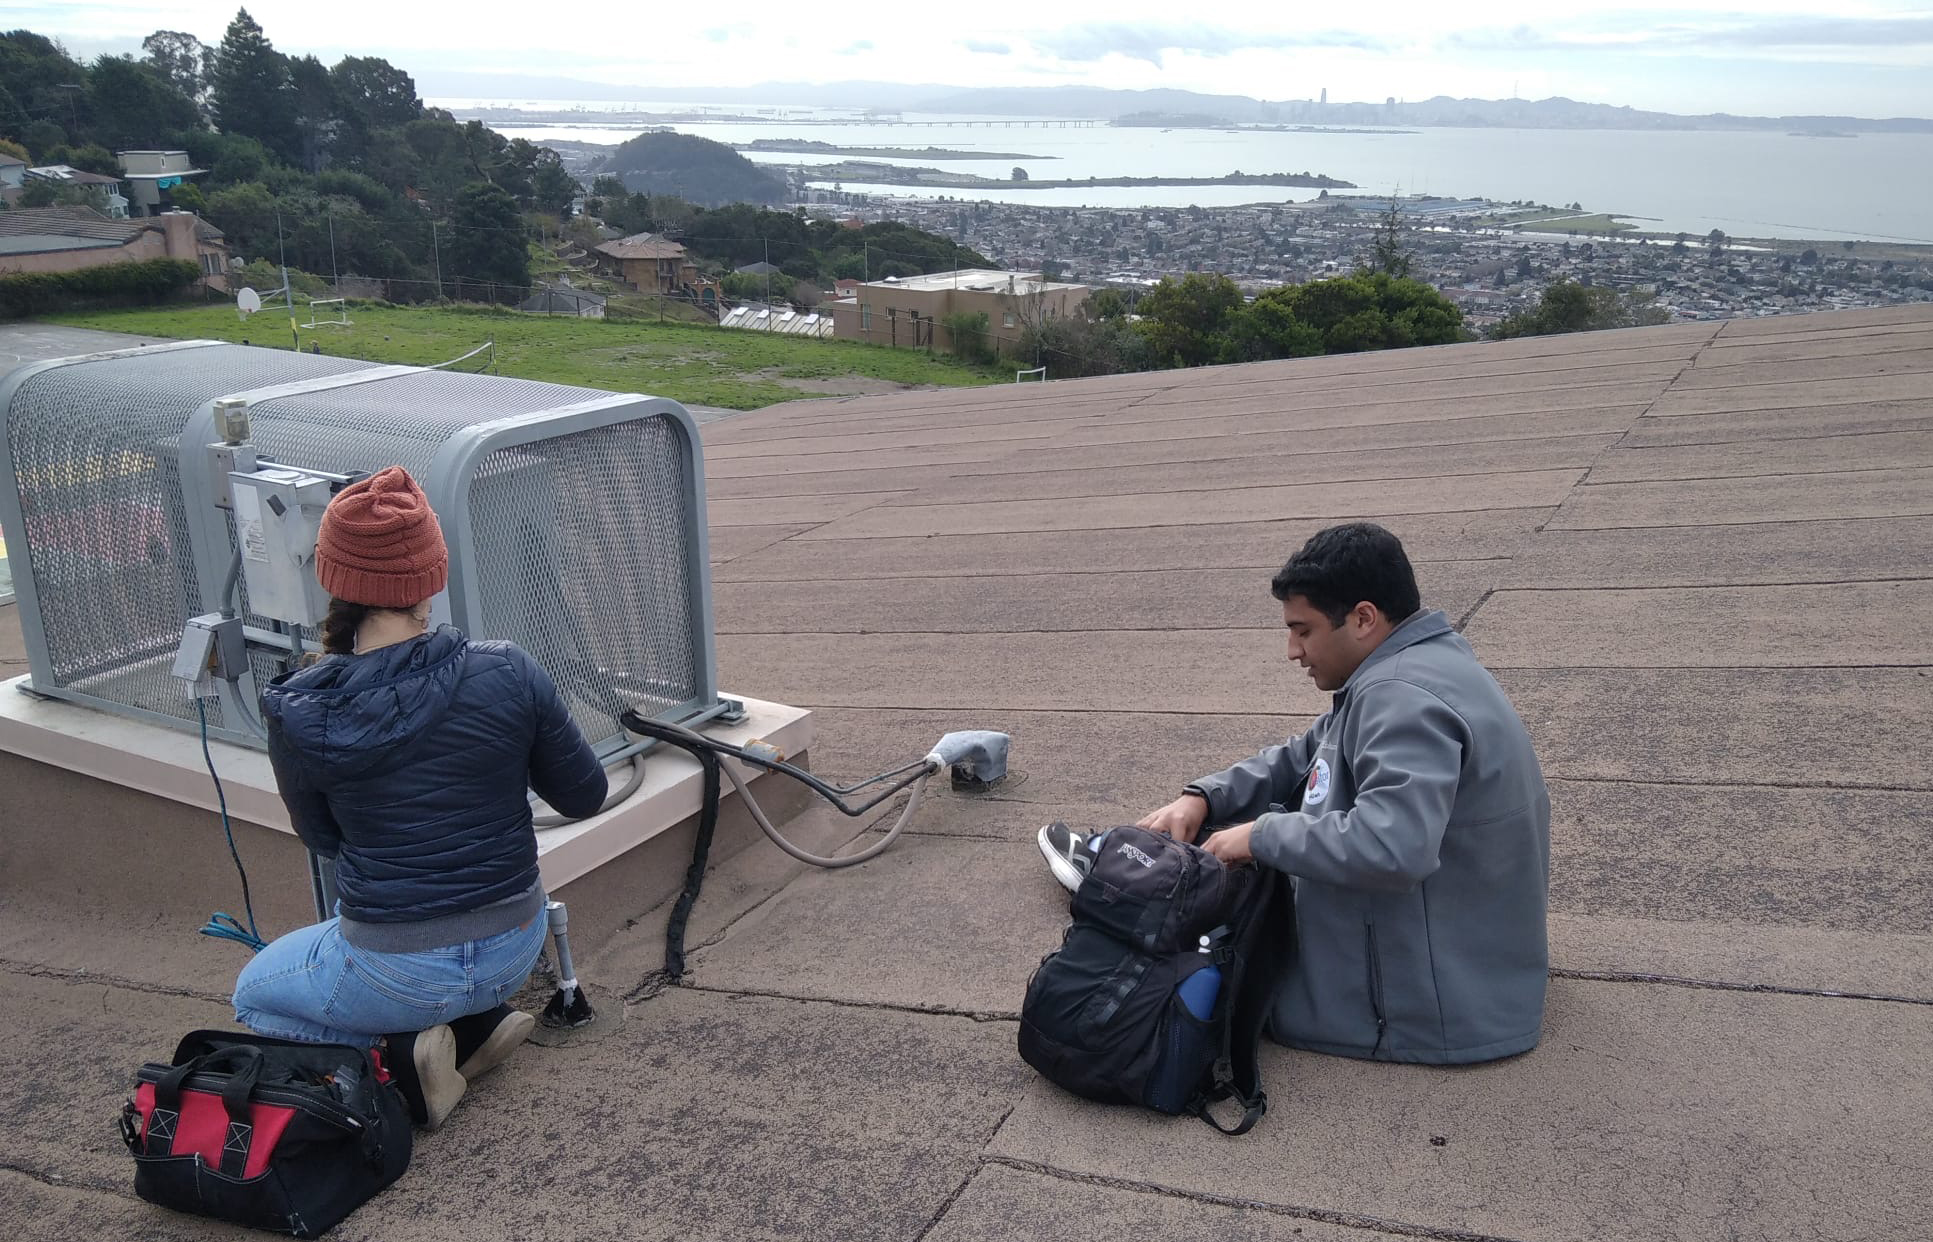 a man and woman on a roof with packs working on equipment with the SF skyline in background